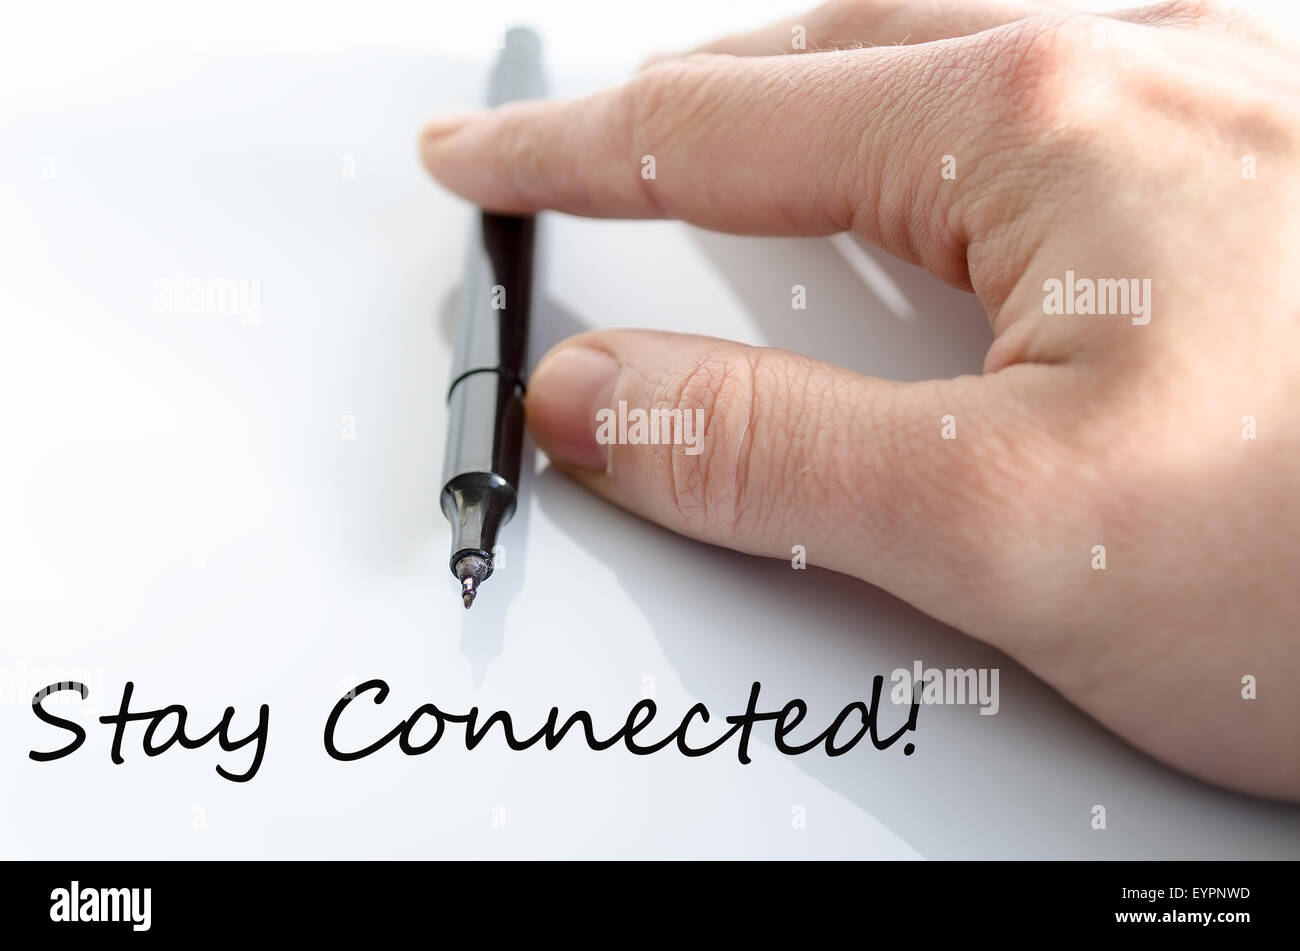 Stay connected hand concept isolated over white background Stock Photo